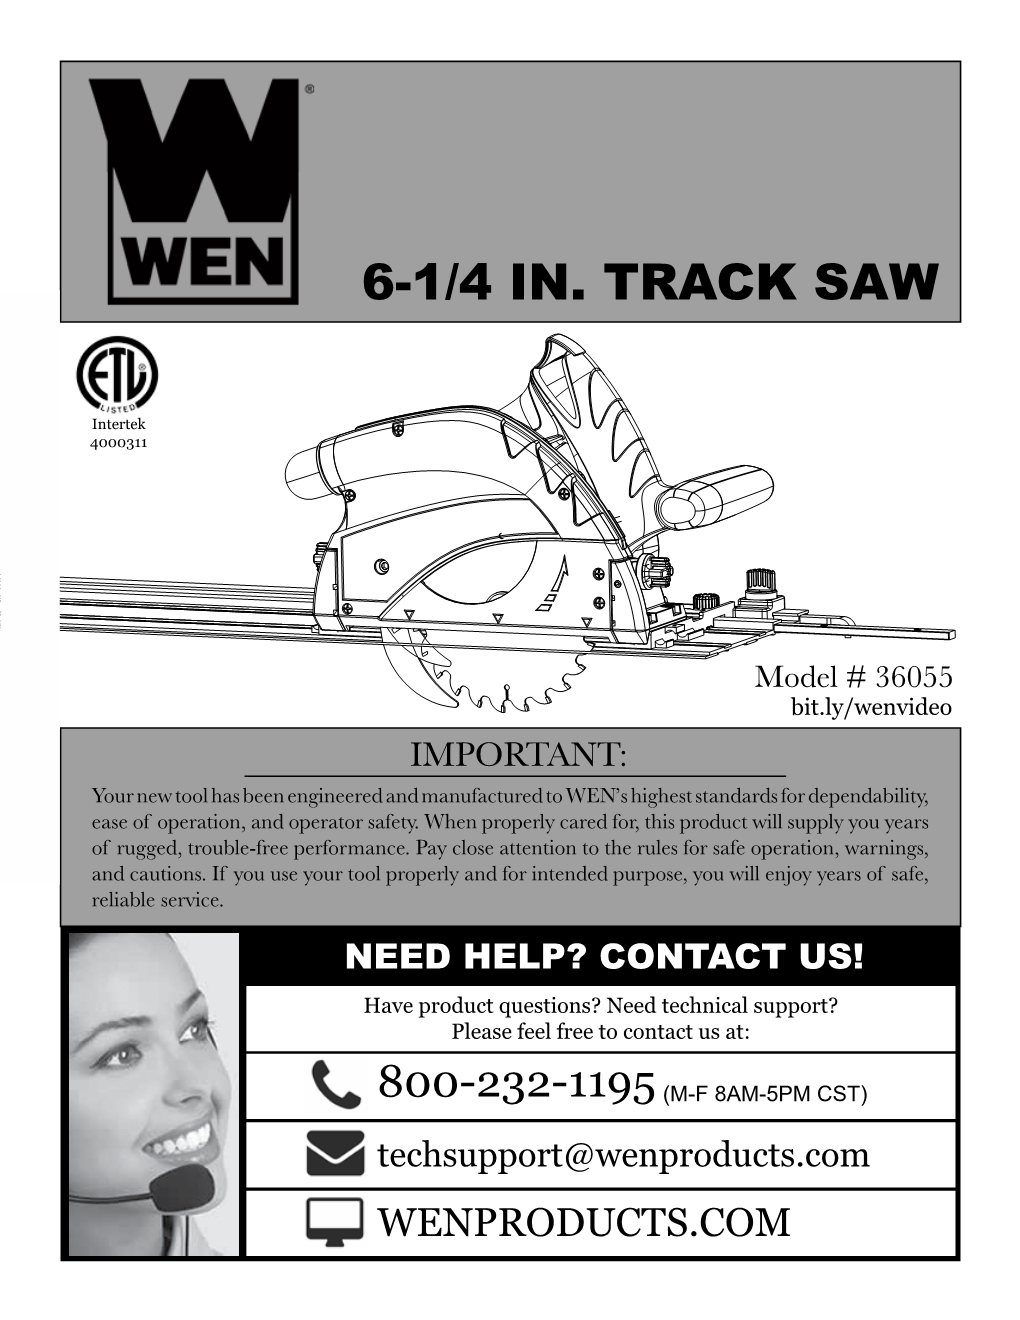 6-1/4 In. Track Saw